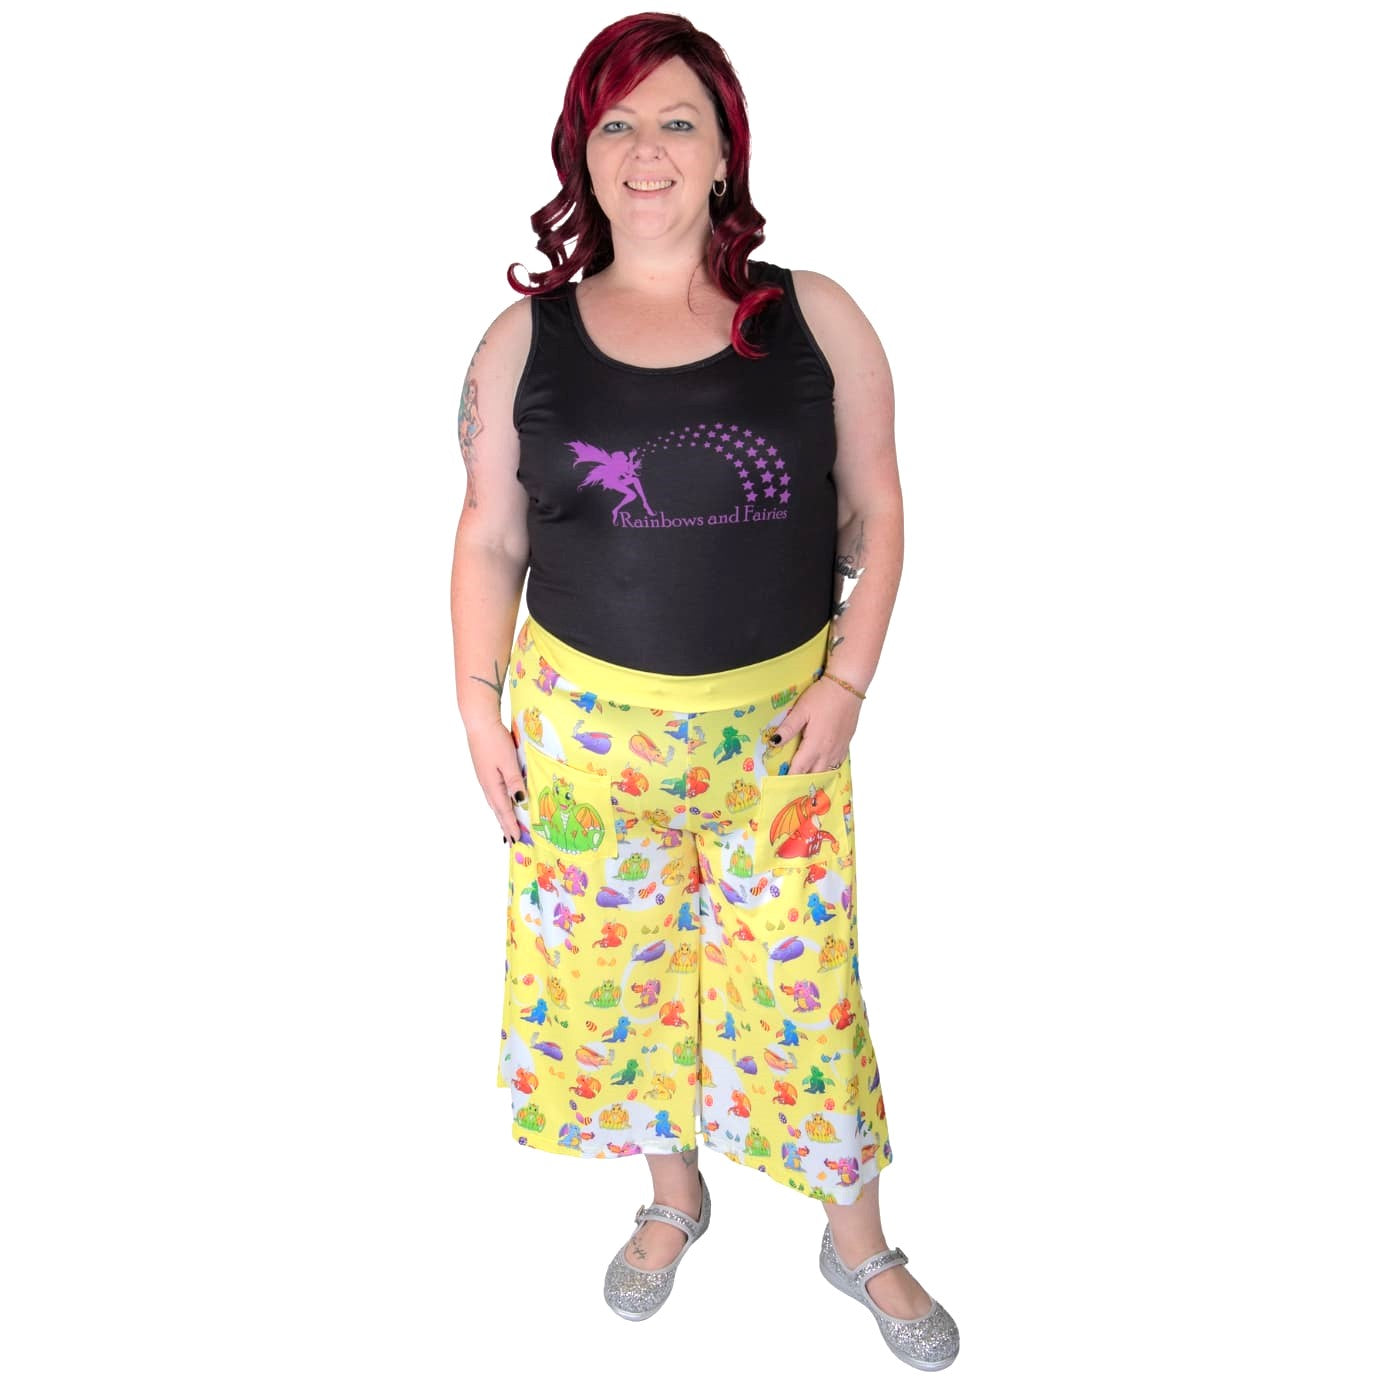 Brood Culottes by RainbowsAndFairies.com.au (Dragons - Vintage - Baby Dragon - Wide Leg Pants - Pokemon Inspired - 3 Quarter Pants - Kitsch) - SKU: CL_CULTS_BROOD_ORG - Pic-02